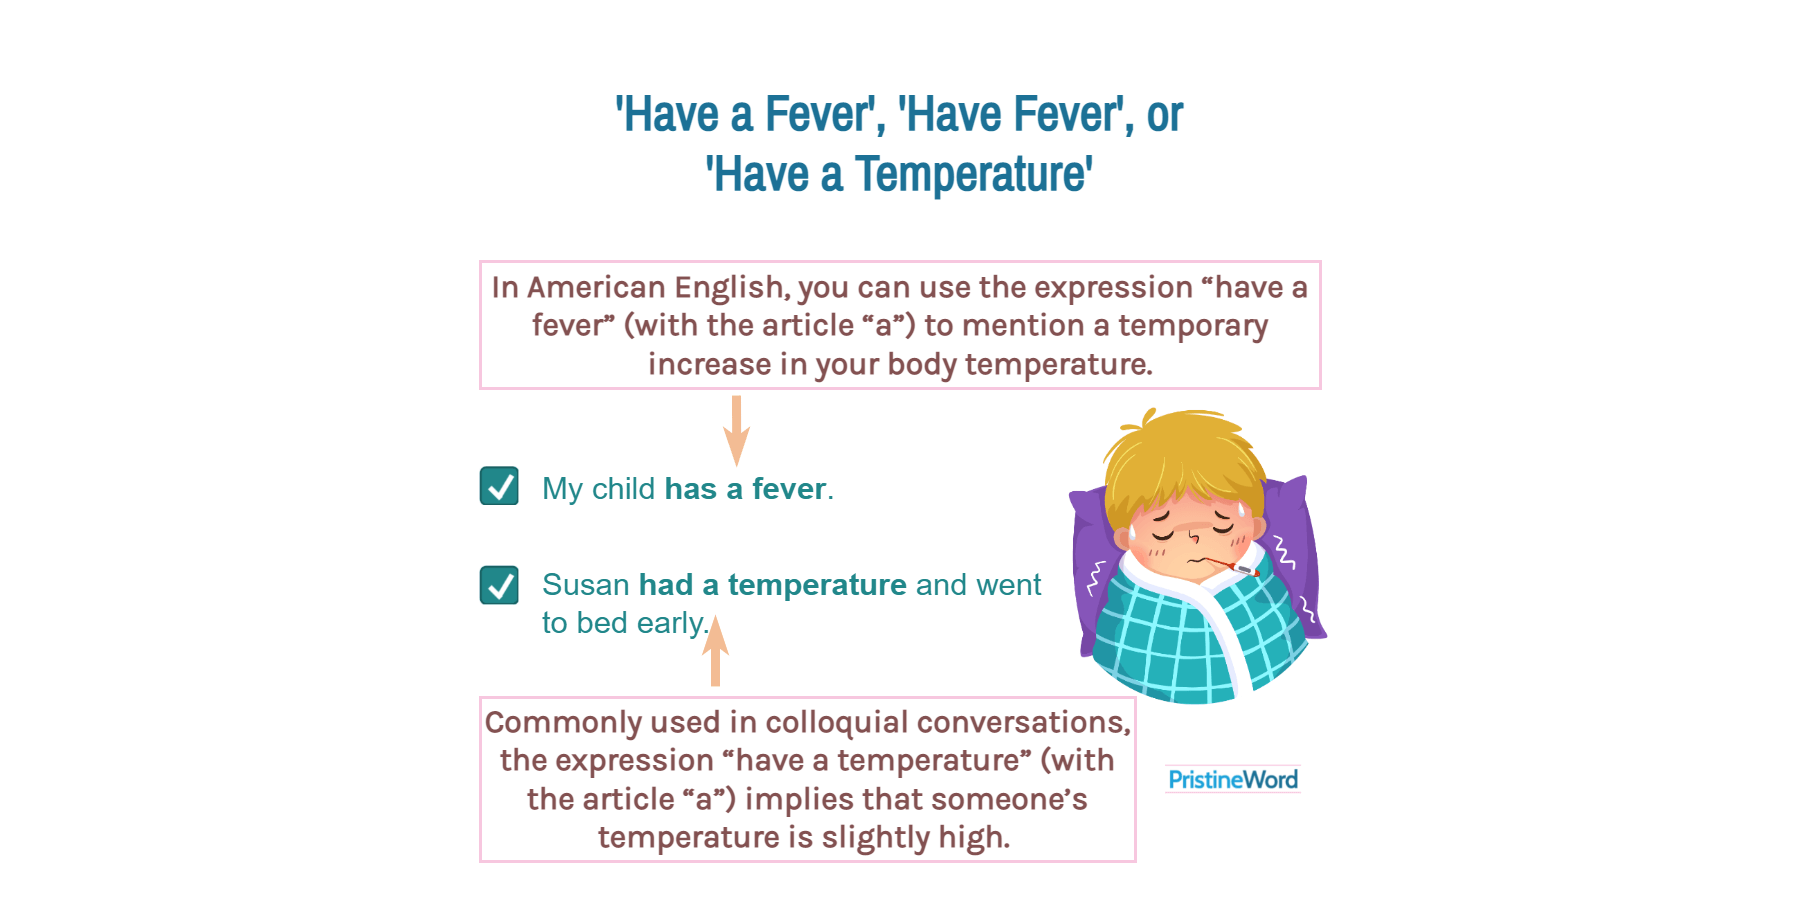 'Have a Fever', 'Have Fever', or 'Have a Temperature'